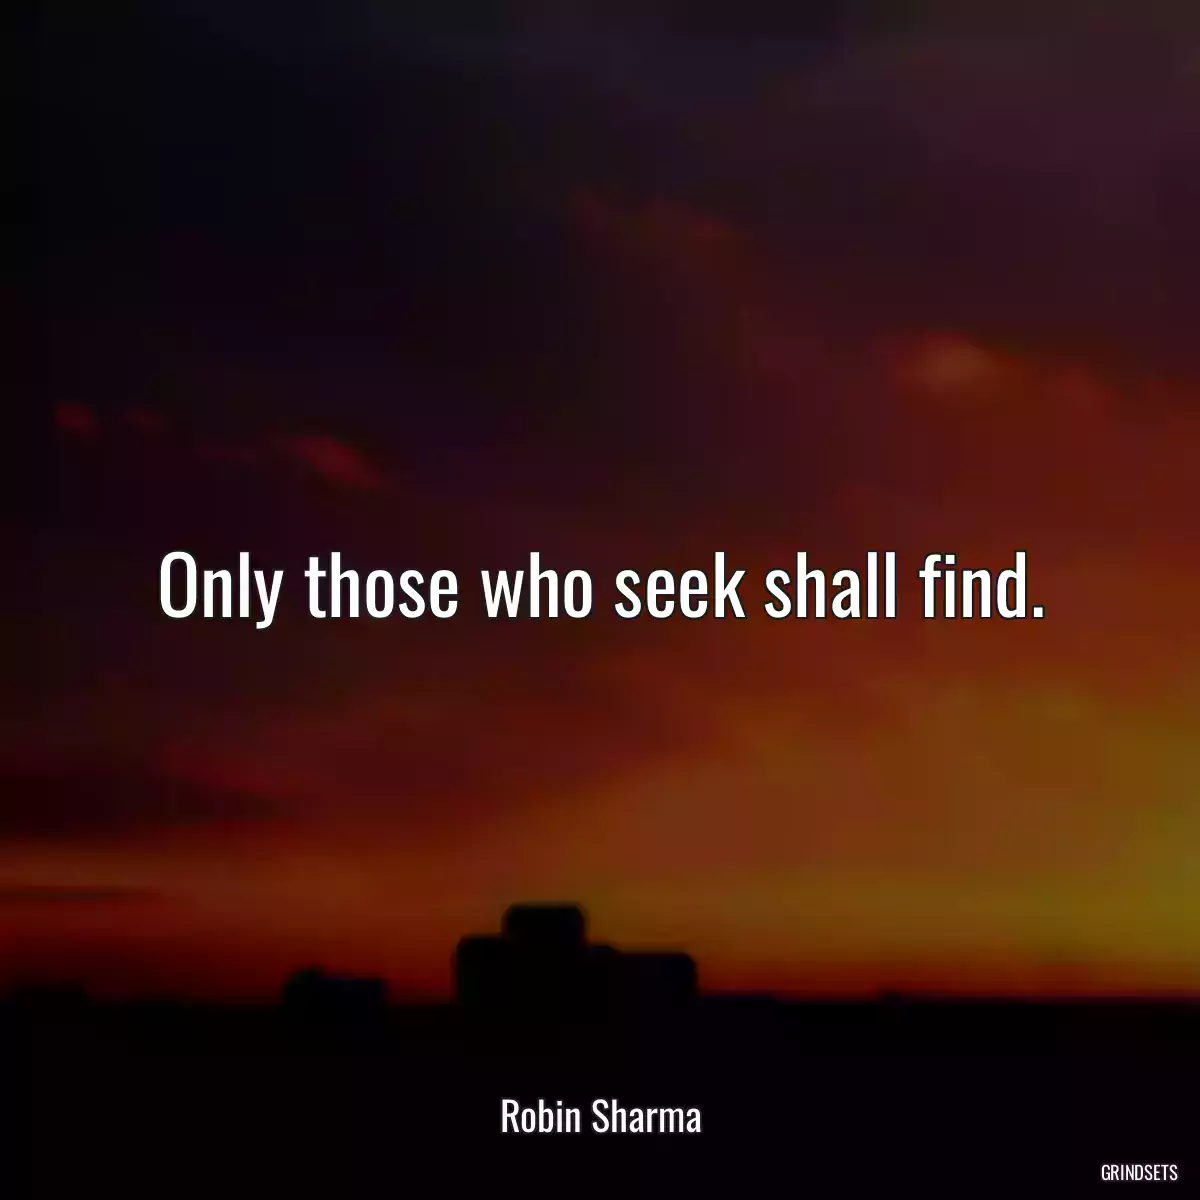 Only those who seek shall find.